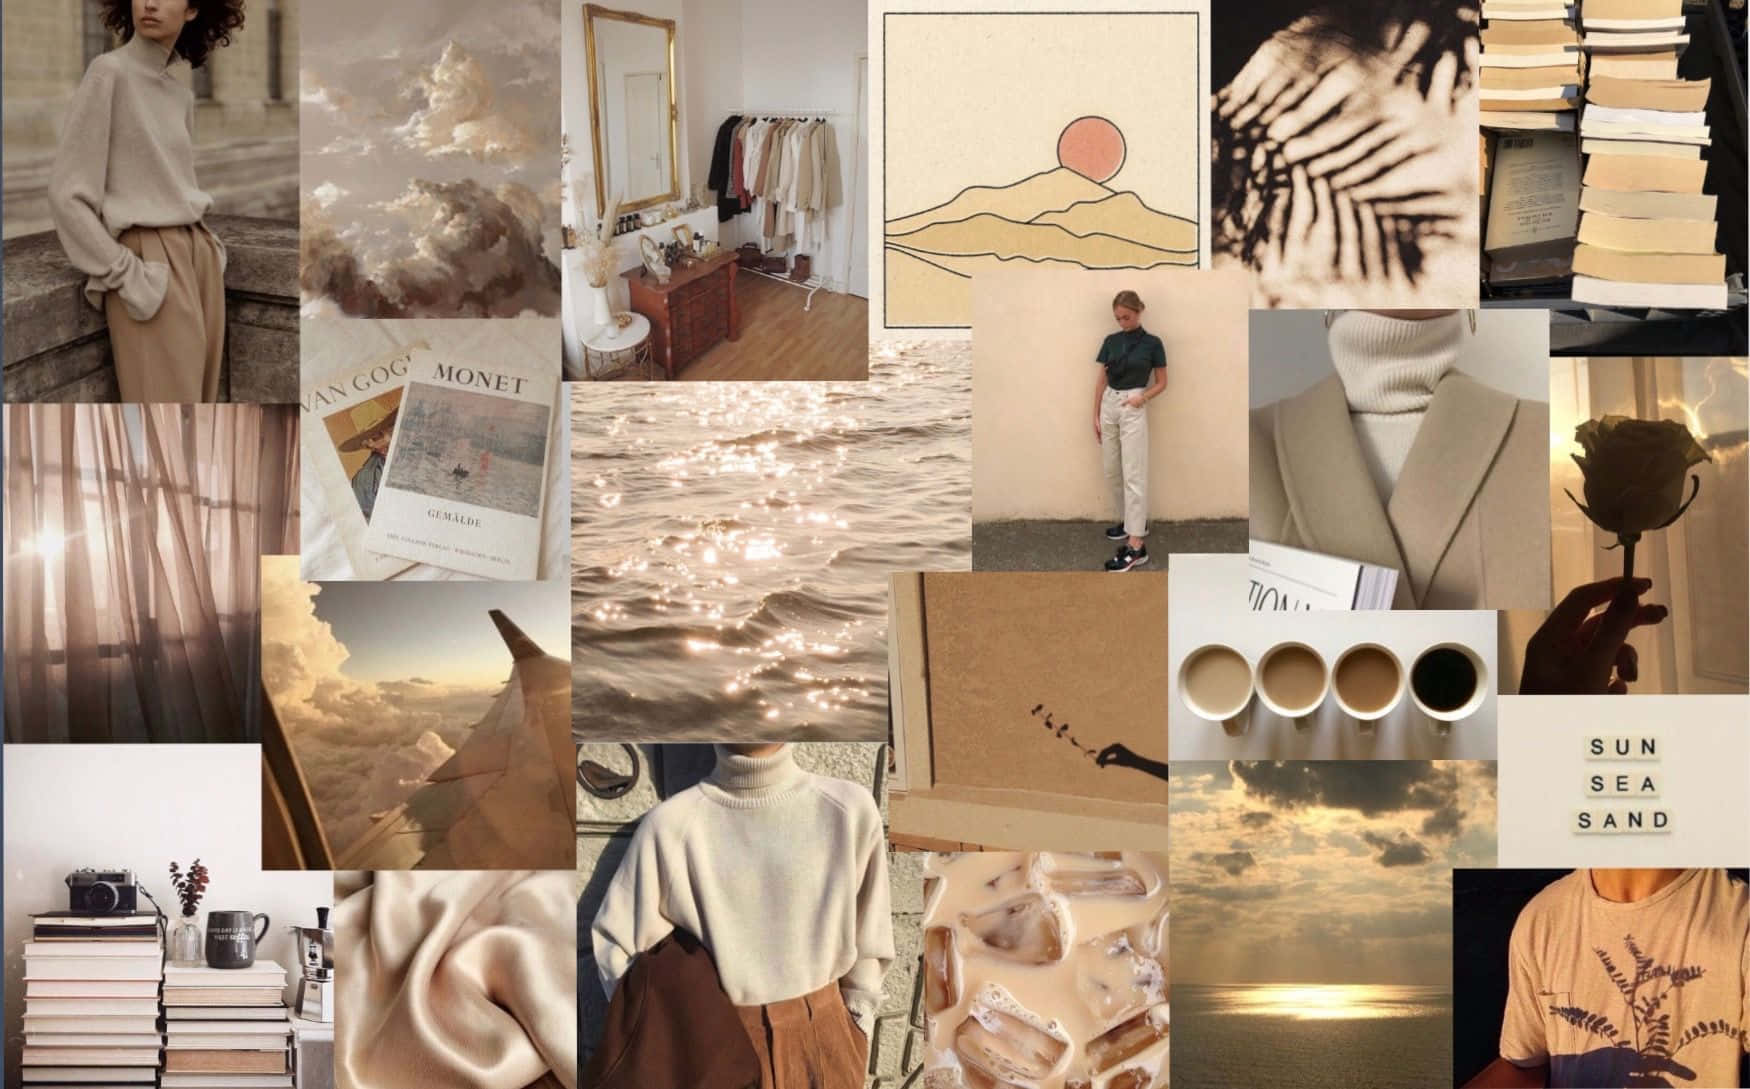 The soft and serene beige aesthetic